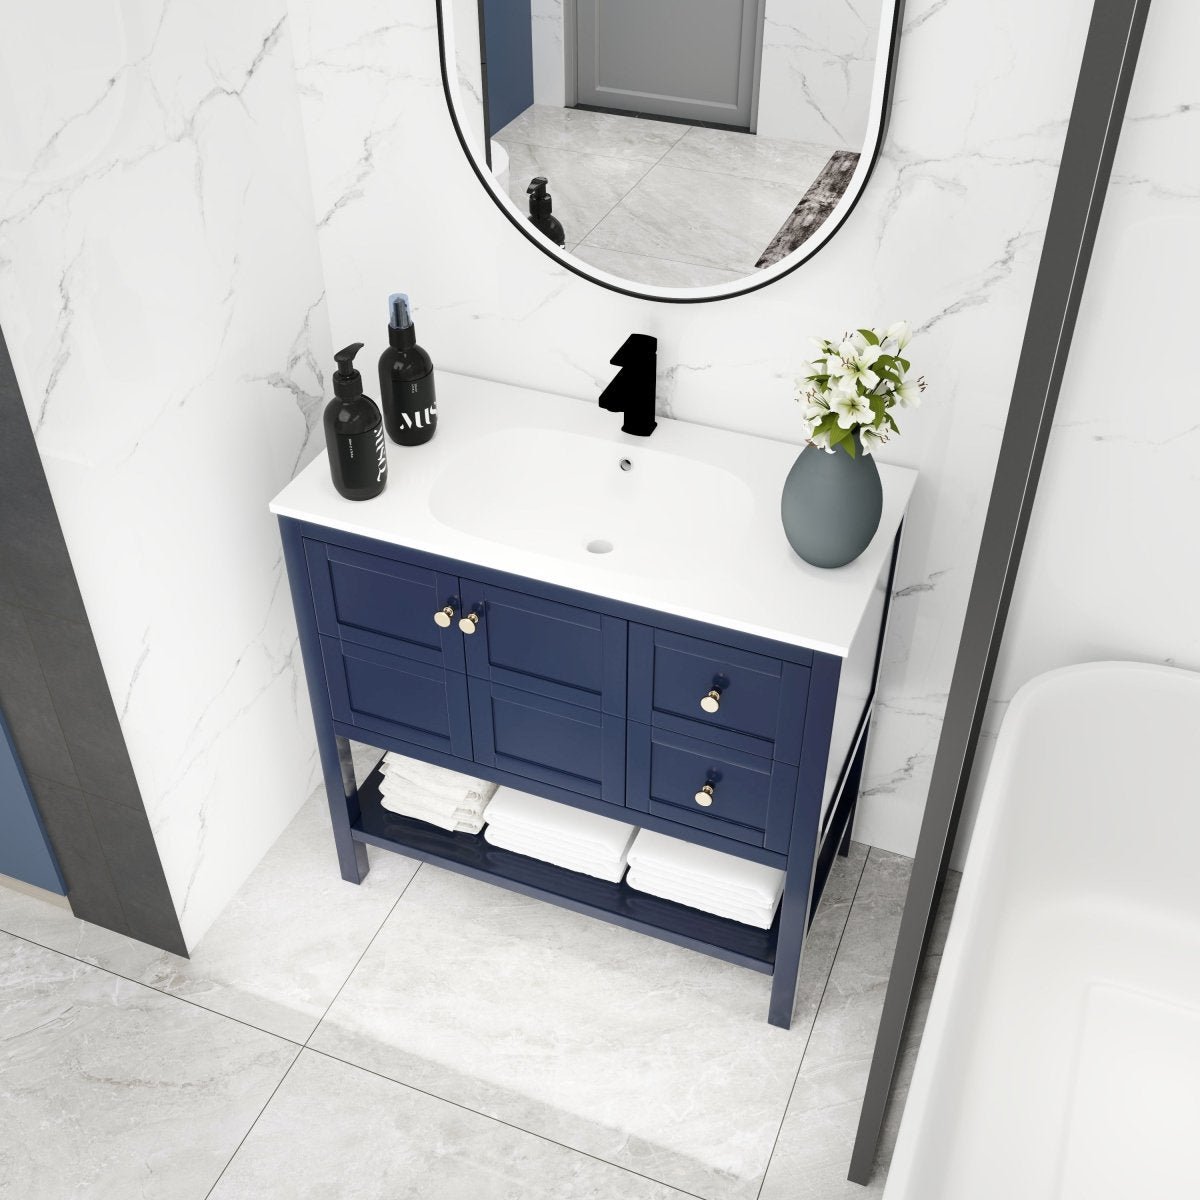 ExBrite 36x18 Bathroom Vanity With Soft Close Drawers And Gel Basin Blue